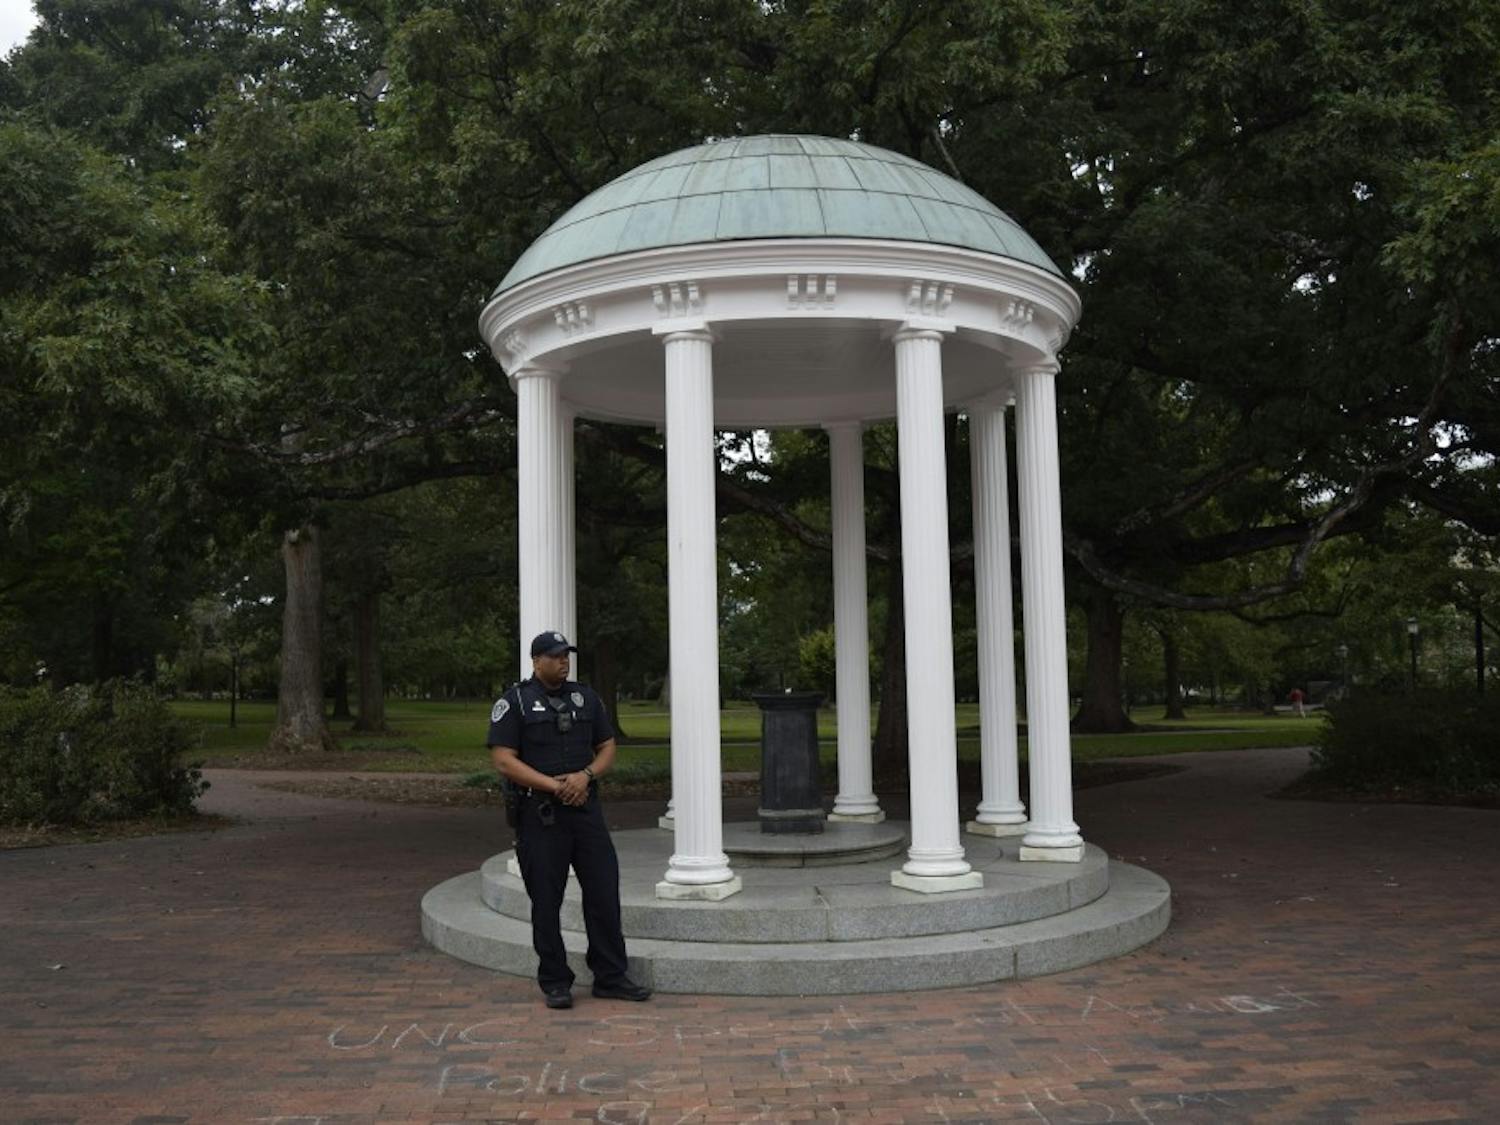 Patrol Officer Jamison McKire monitoring near McCorkle Place Tuesday, Sept. 25.